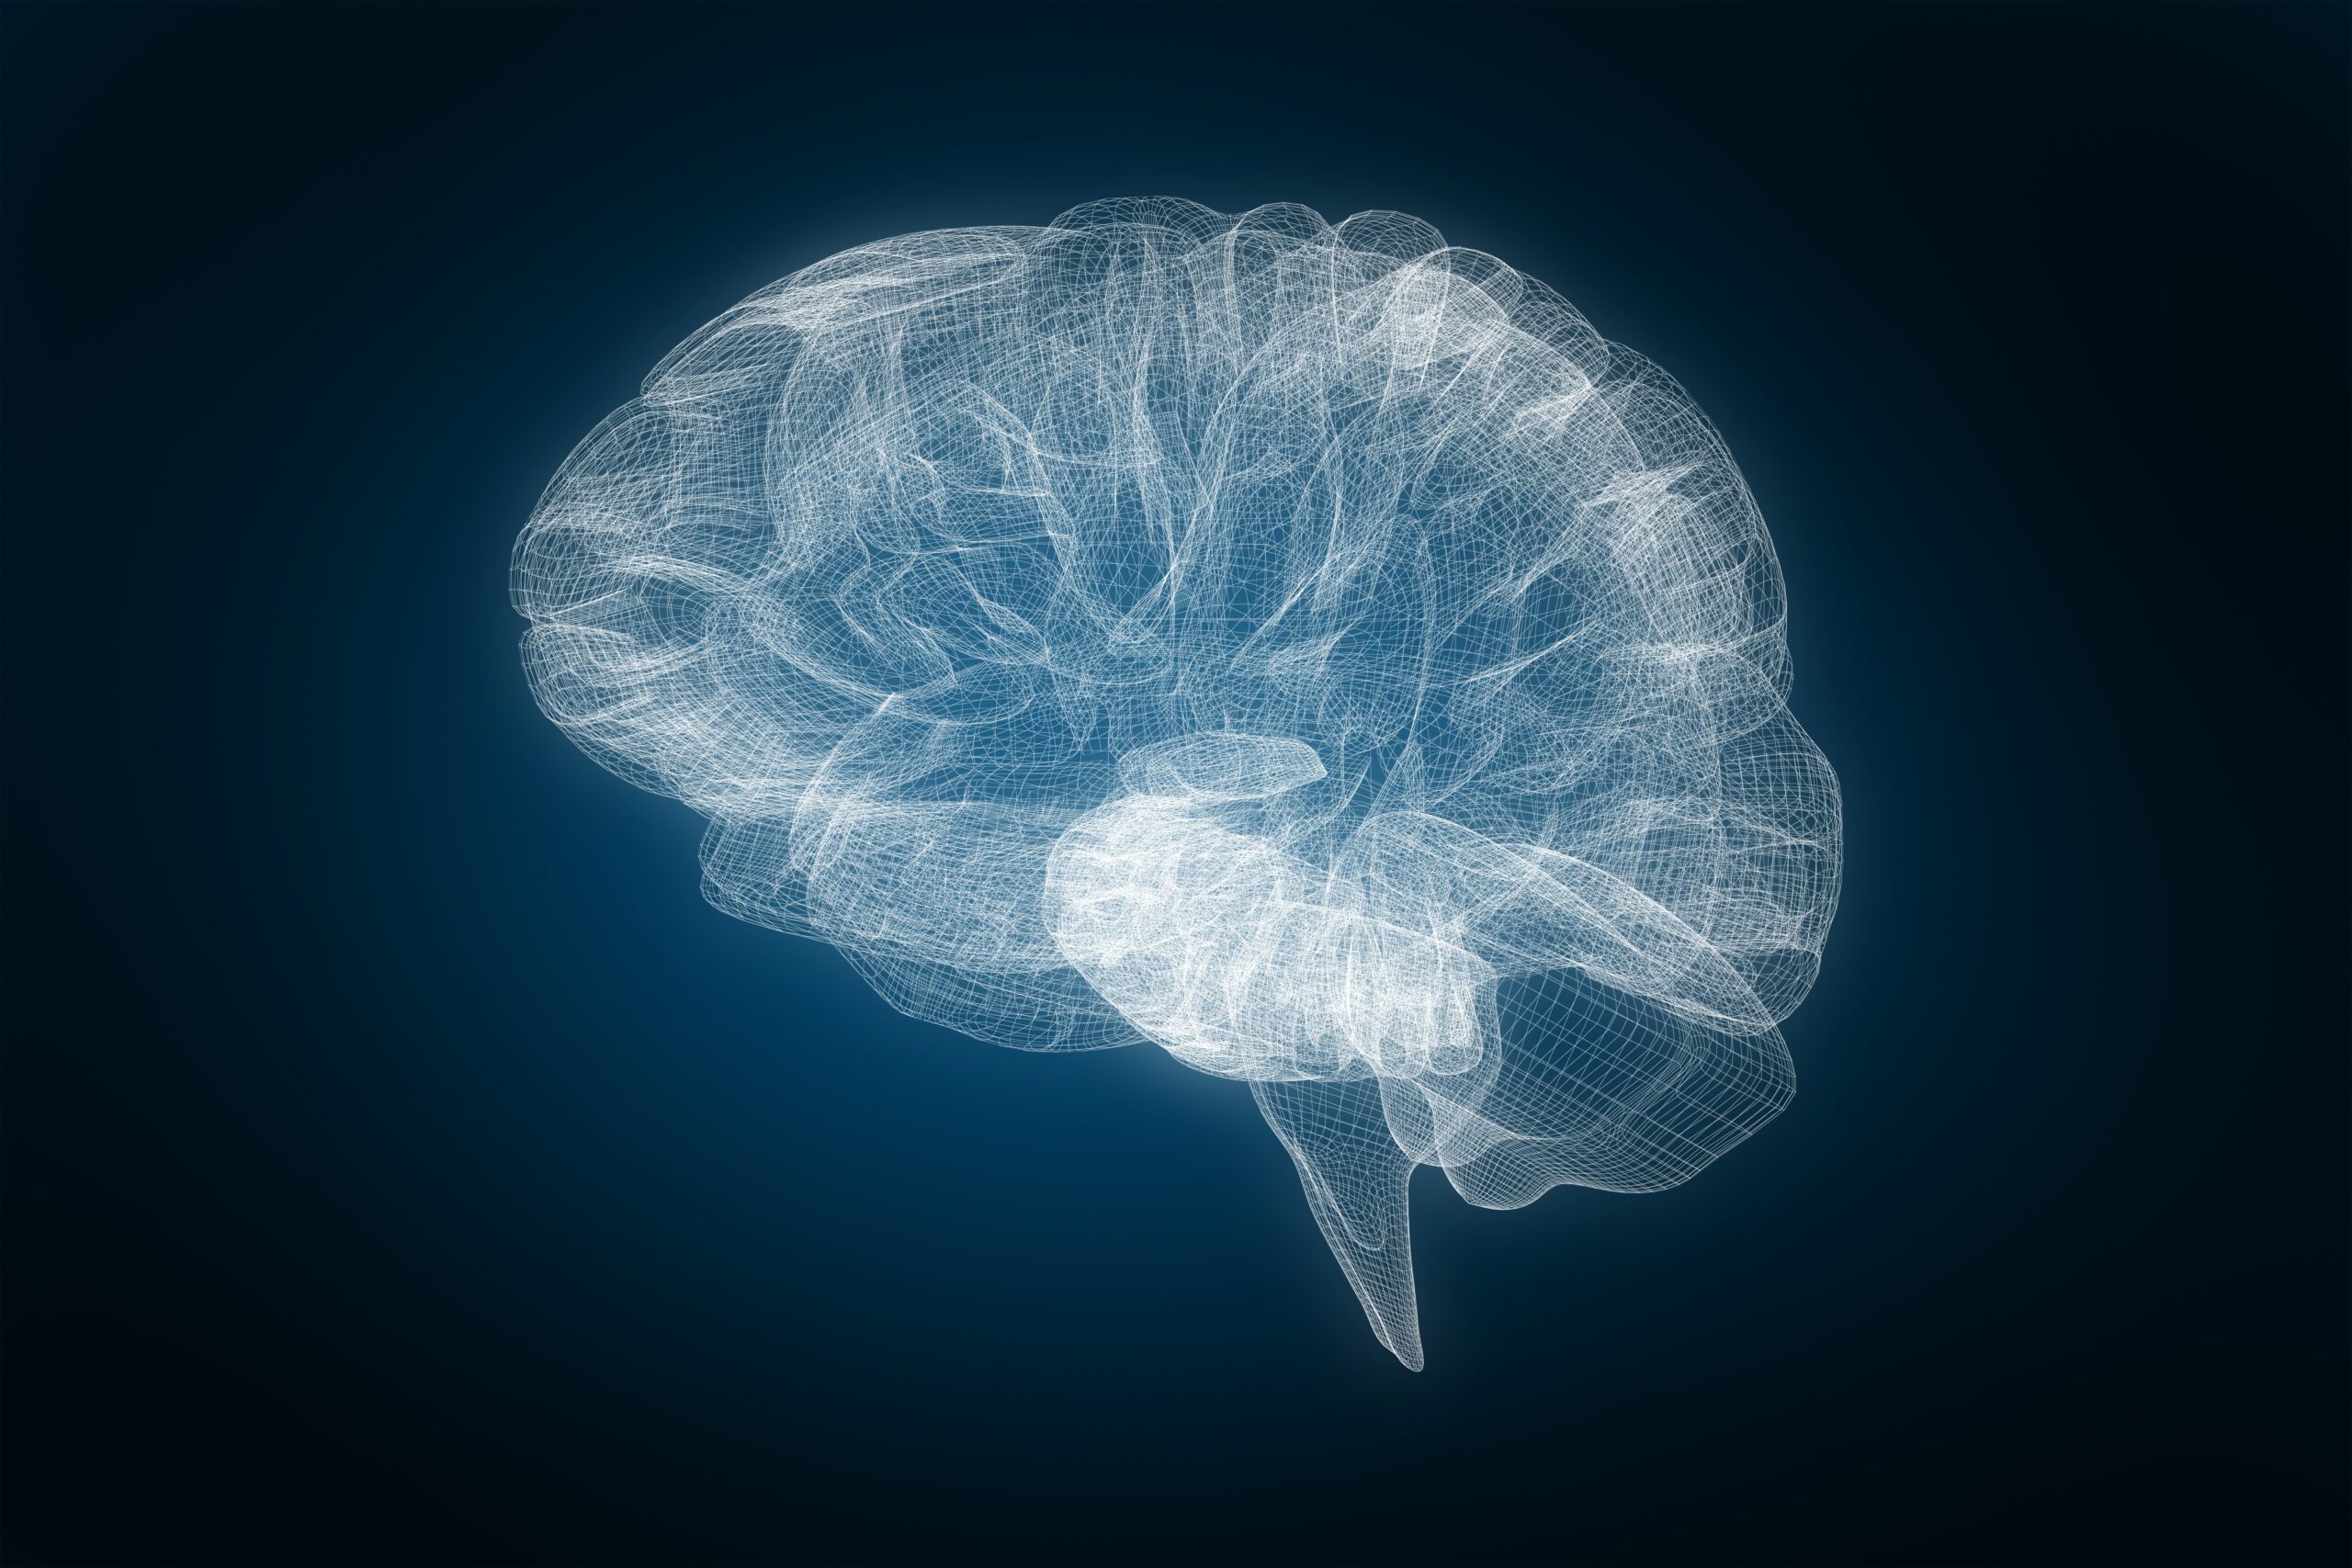 Study Looks At Brain Flow, And How People Achieve It